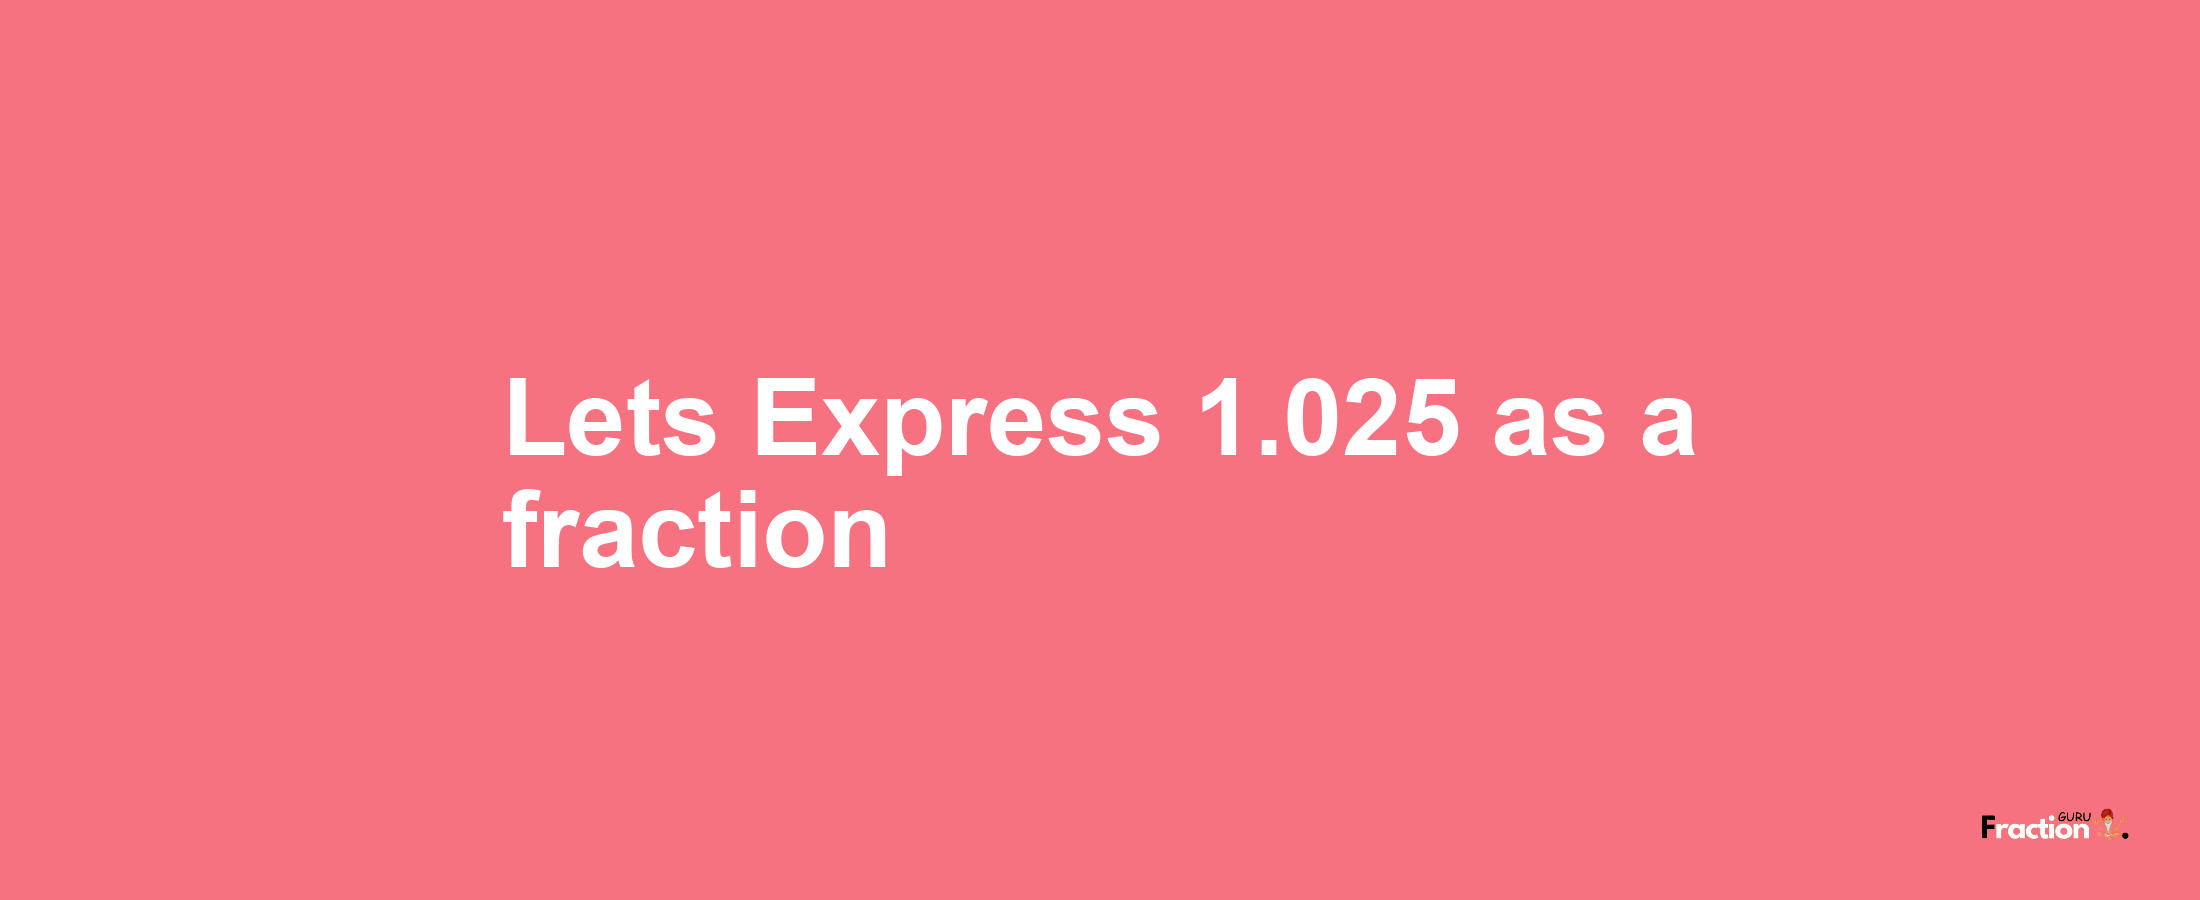 Lets Express 1.025 as afraction